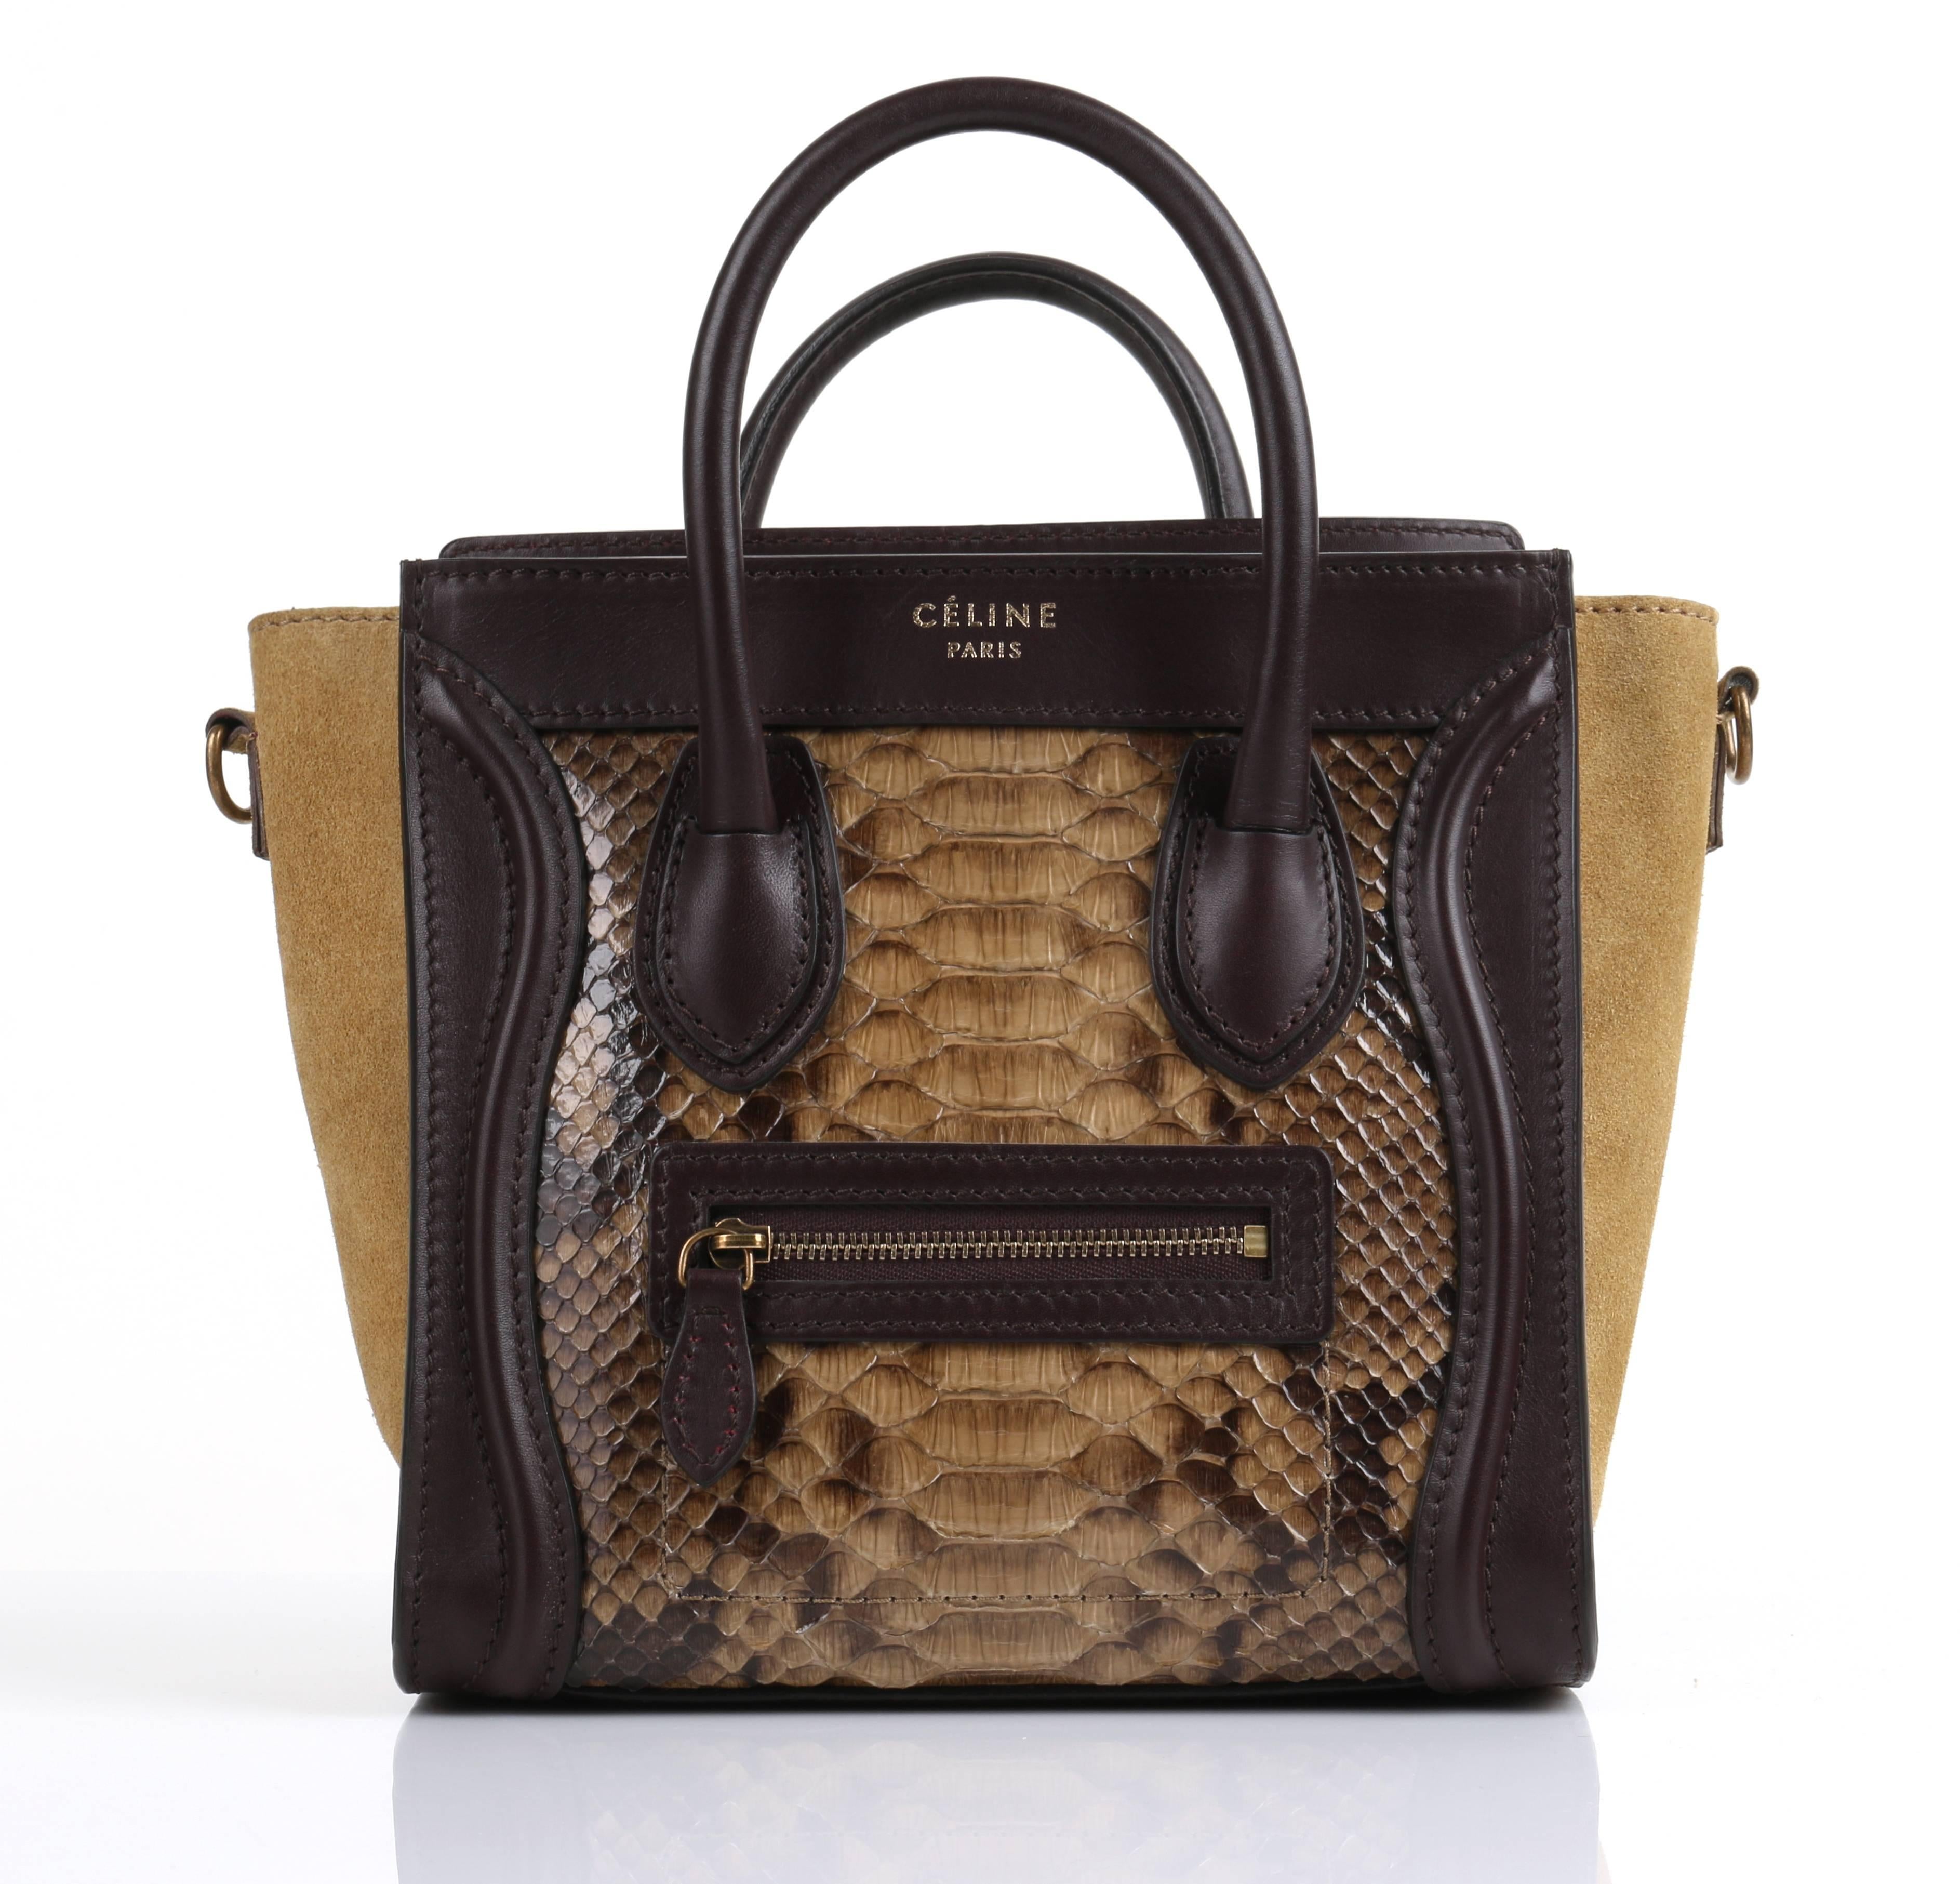 Céline olive/tan genuine python and dark brown leather Nano Luggage tote bag. Olive suede sides. Rolled leather handles. Gold-tone hardware. One small exterior zipper pocket. Zip top to the interior. Leather lined interior has one small slide